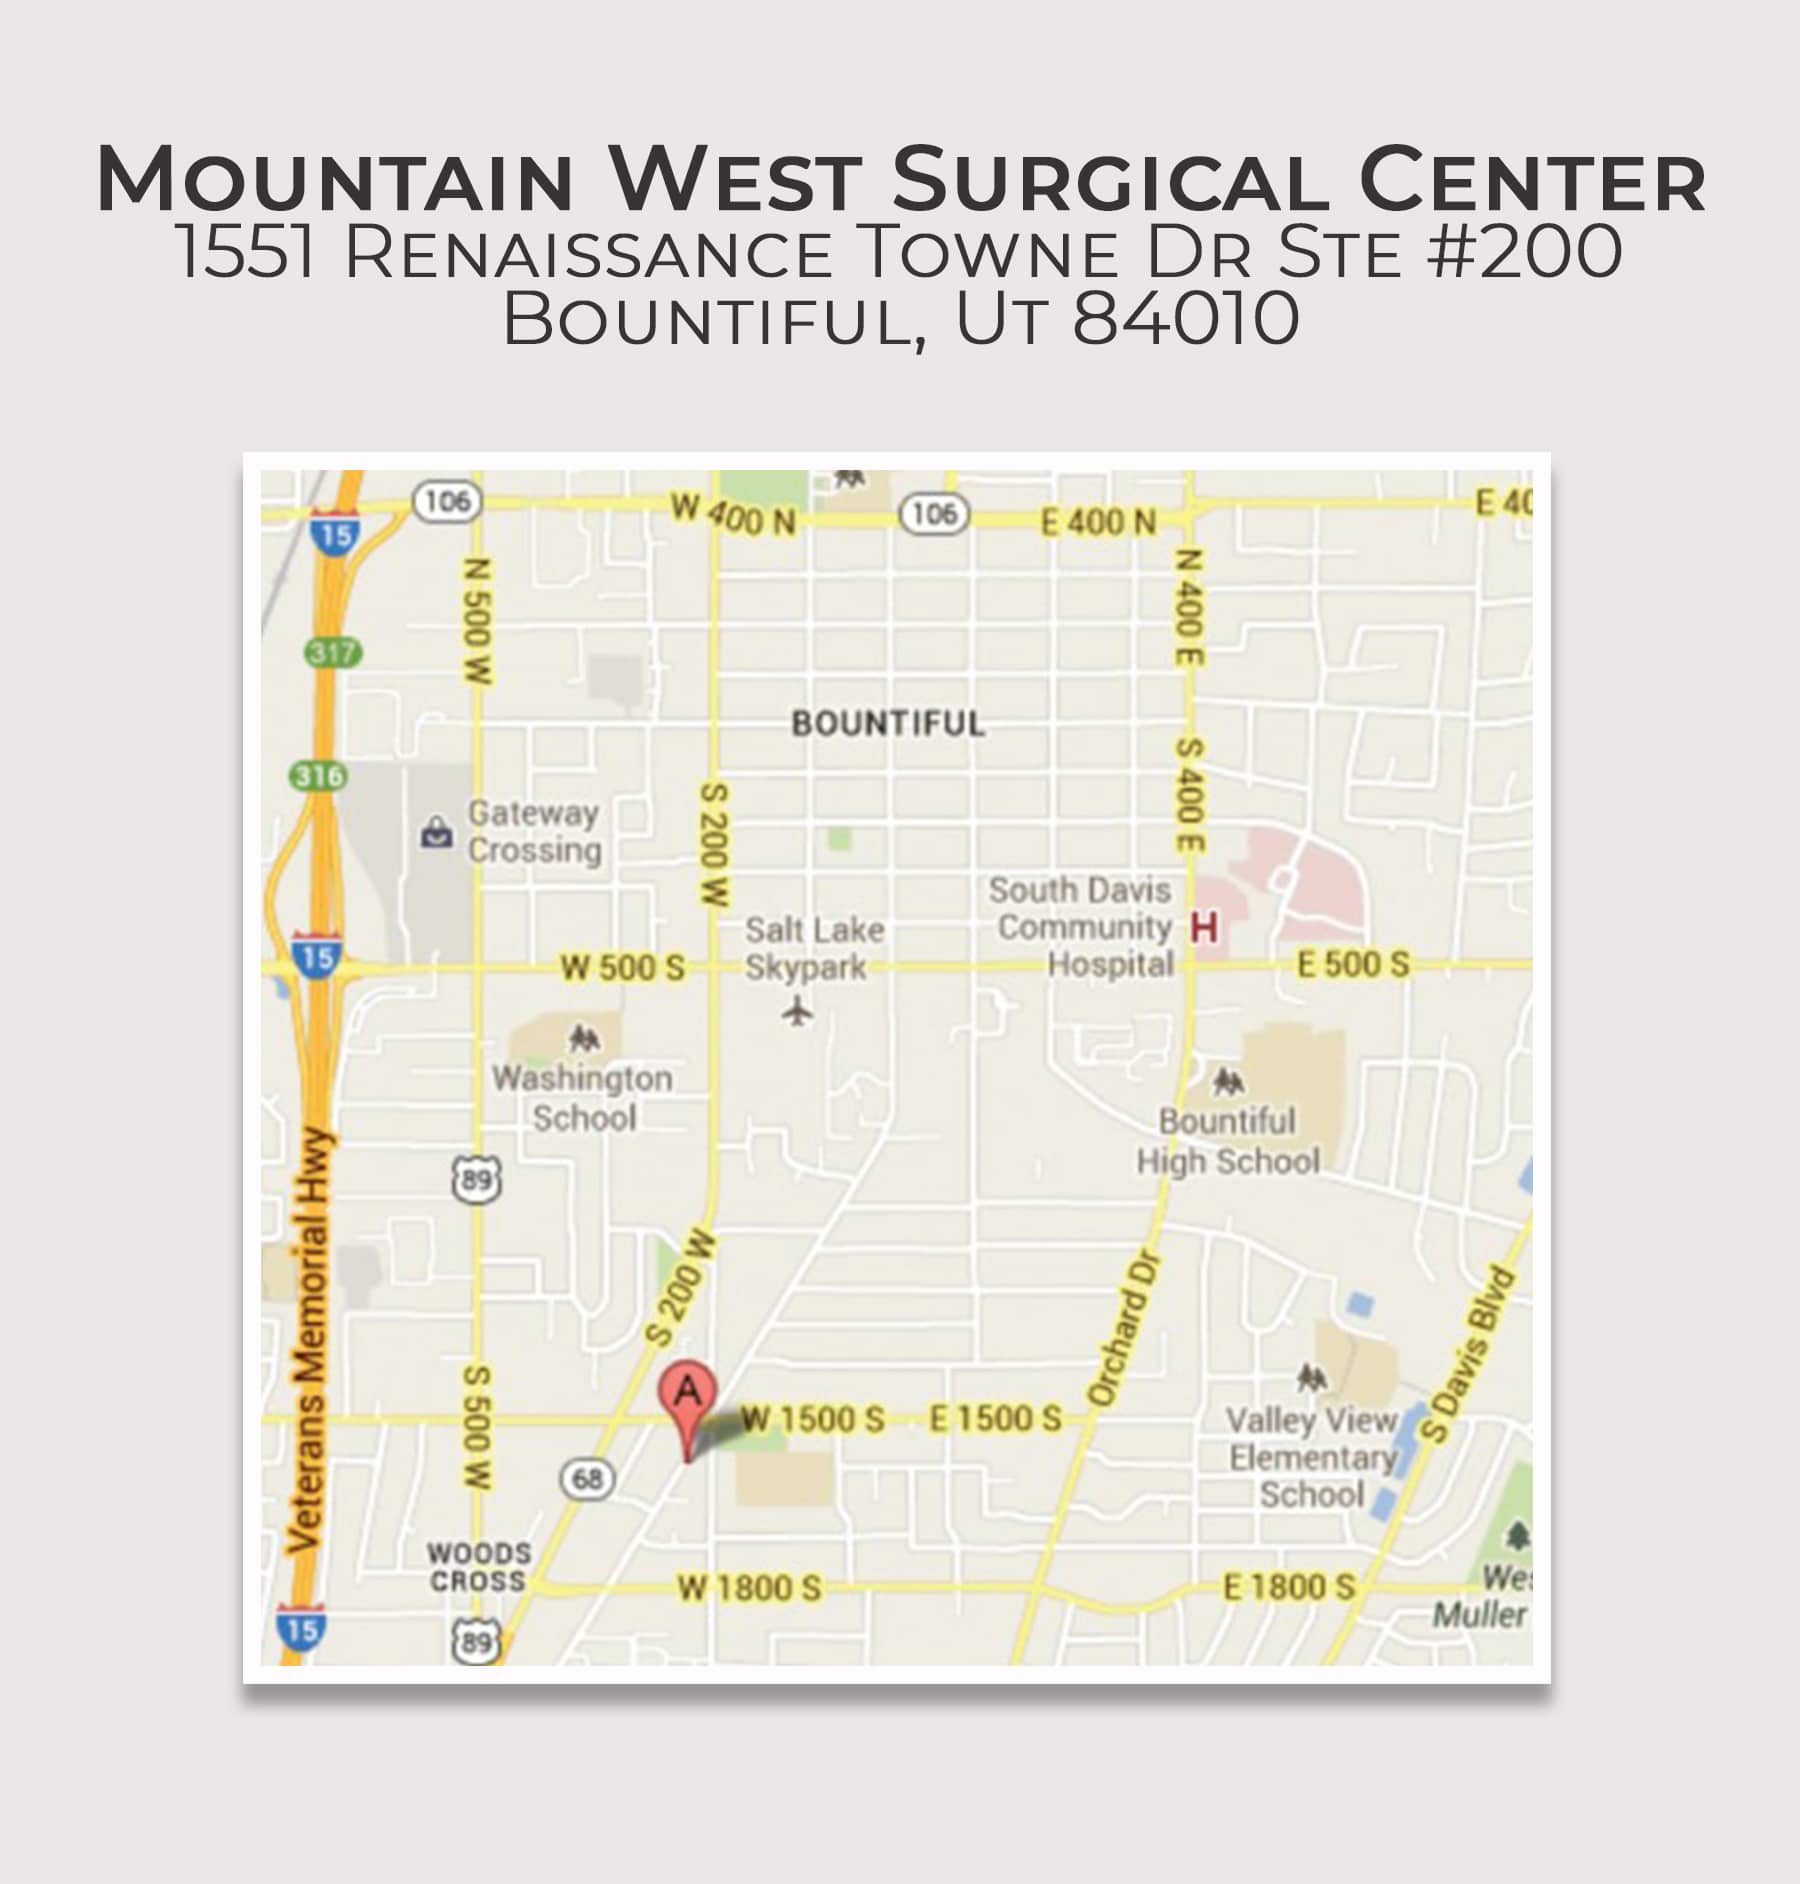 Mountain west surgical center